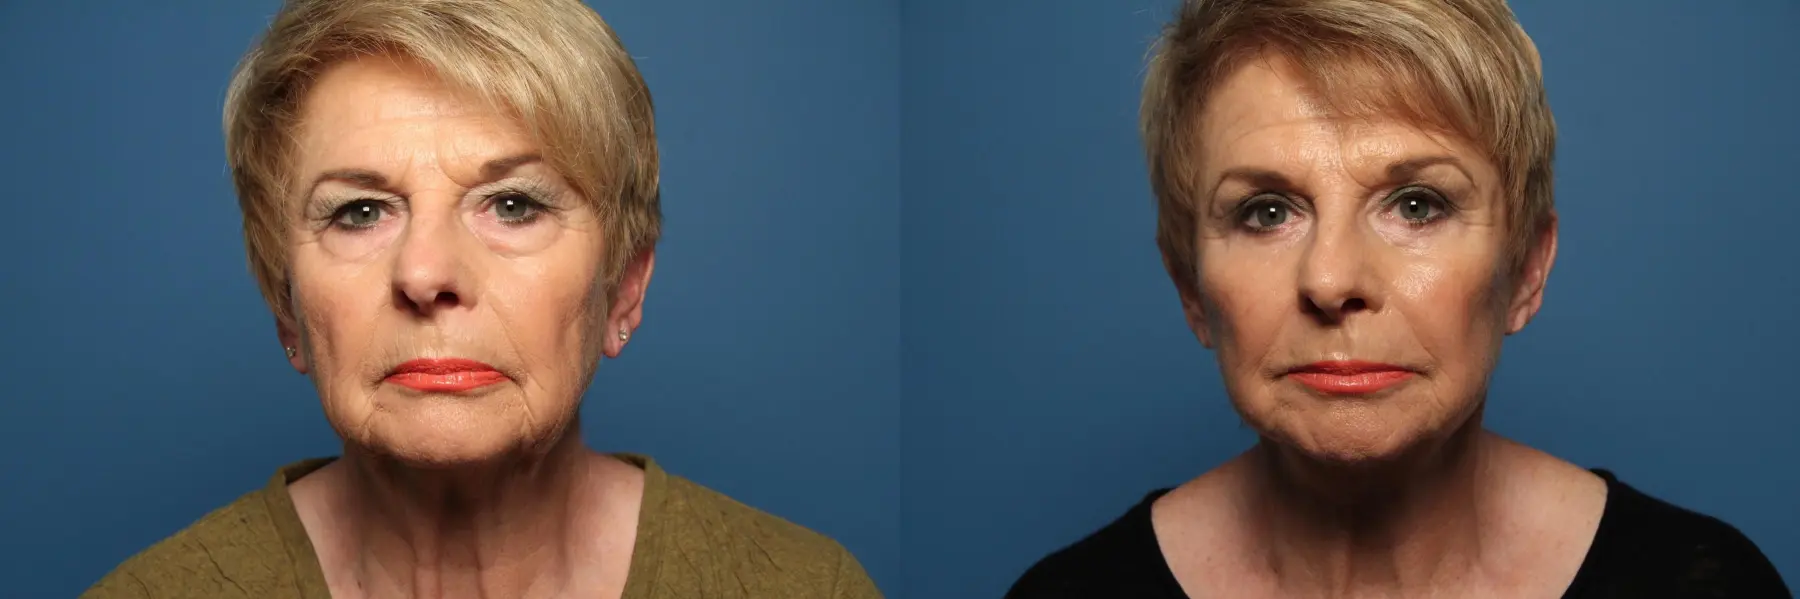 Facelift/Mini Facelift: Patient 2 - Before and After  